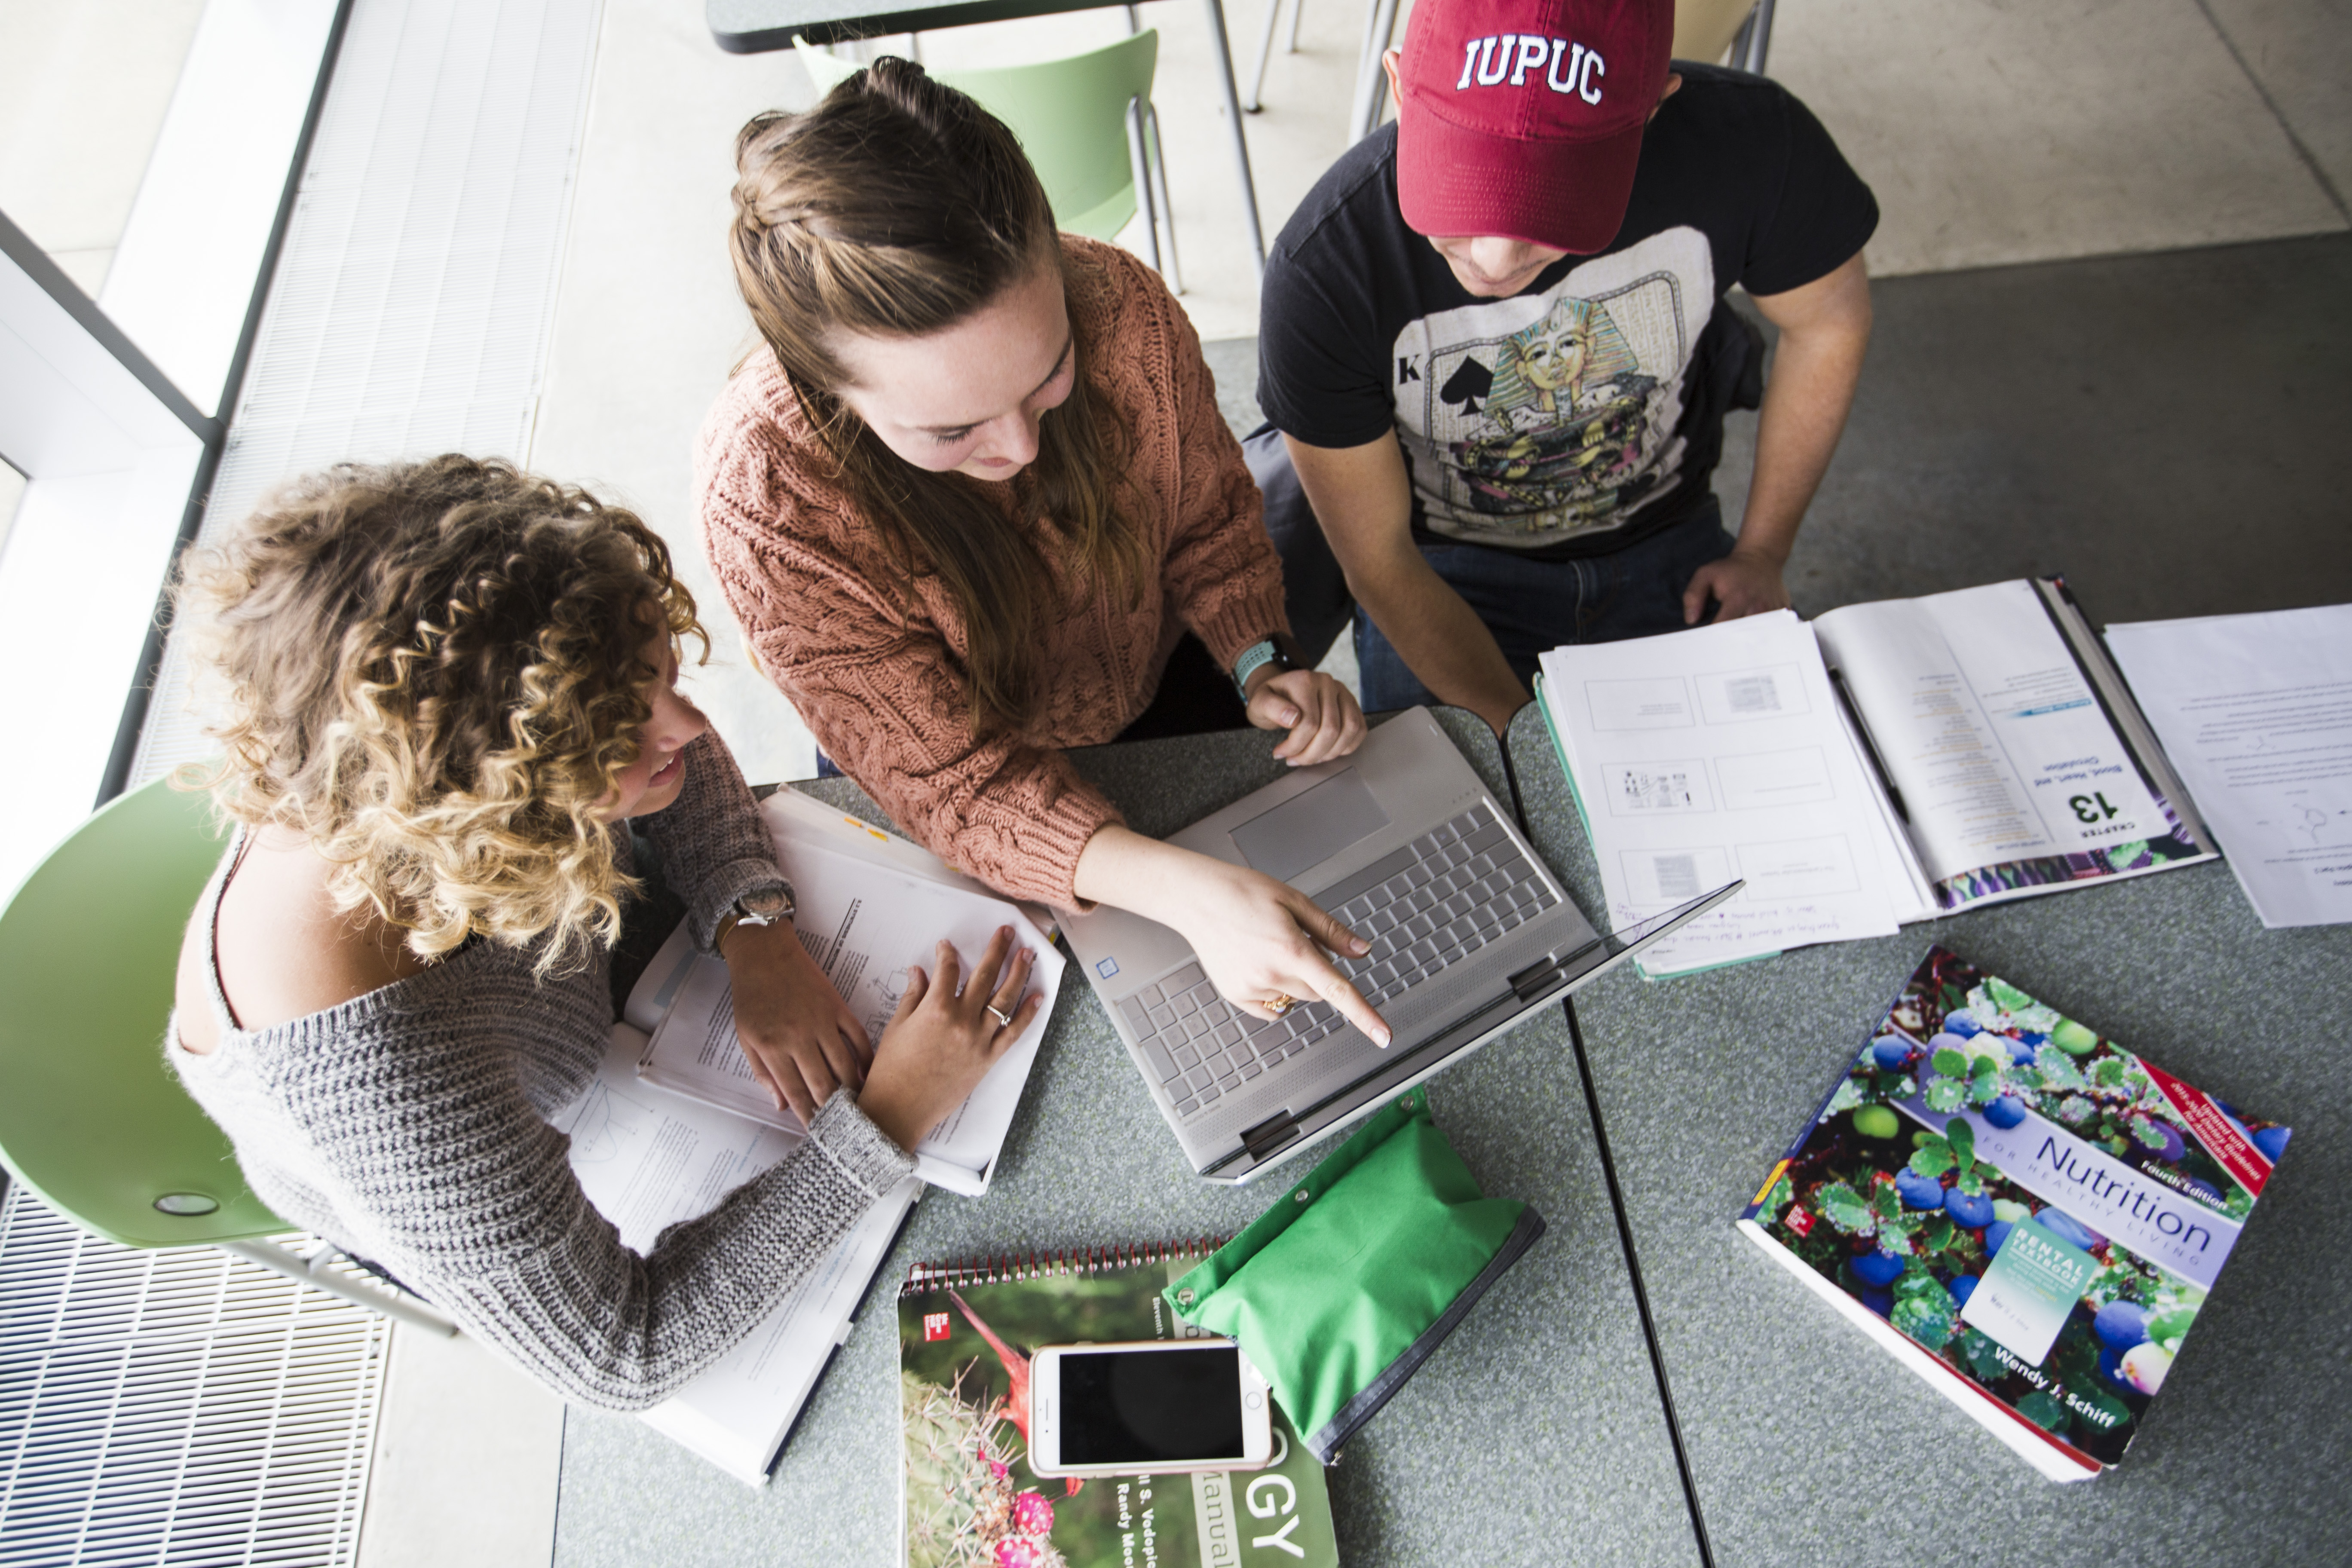 A photo taken from above shows three young adults gathered around a laptop